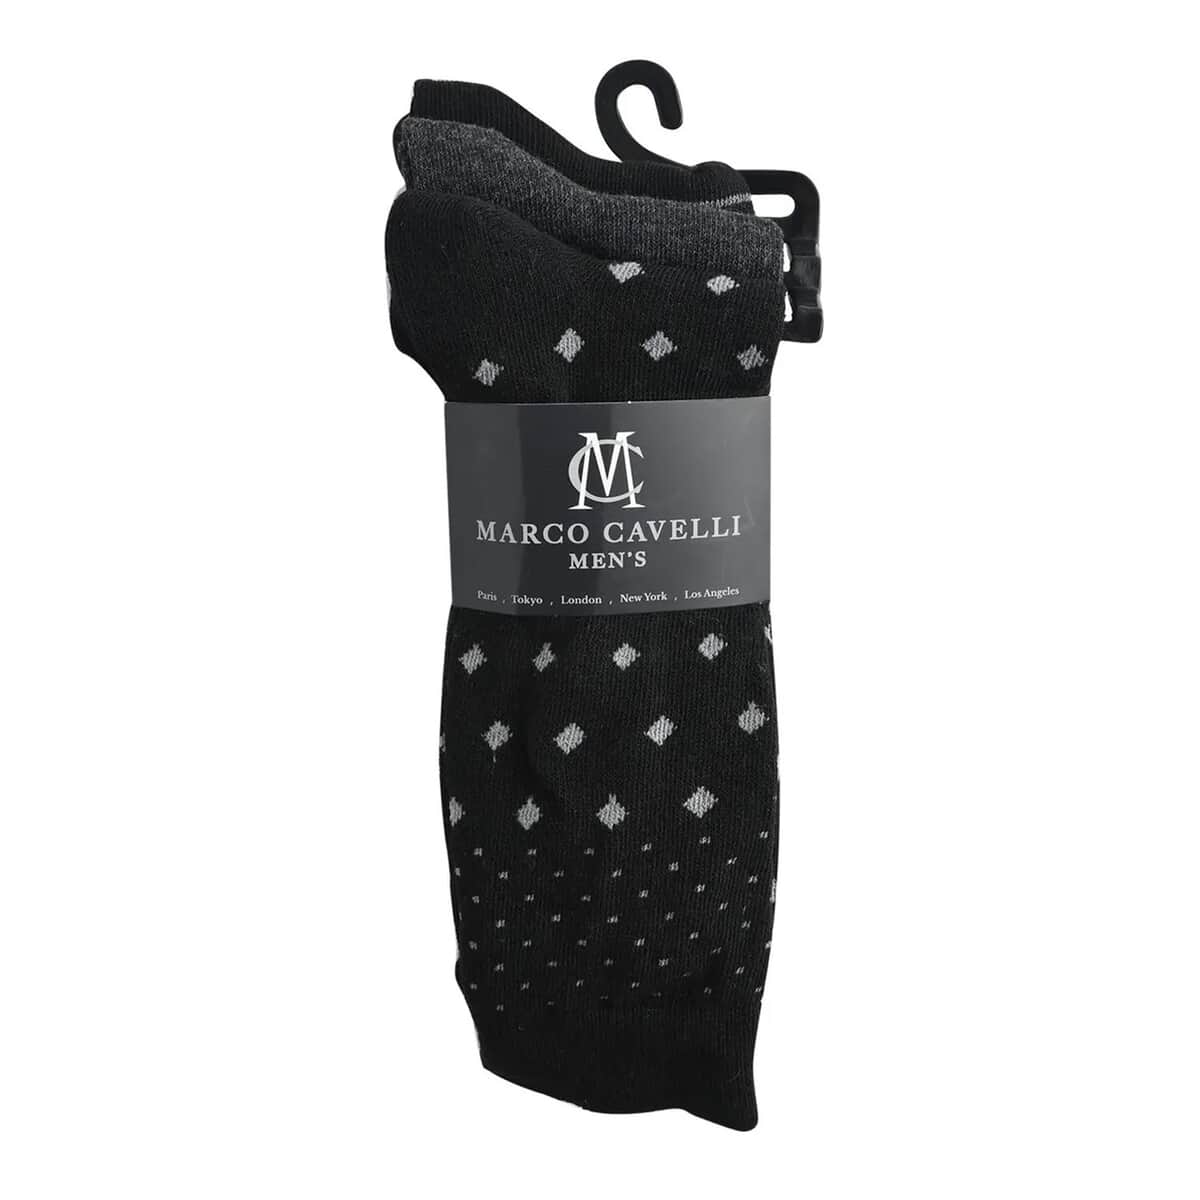 Marco Cavelli Black and Gray Set of 3 Men's Dress Socks, Breathable and Soft Socks for Men, Polyester and Cotton Socks, image number 6